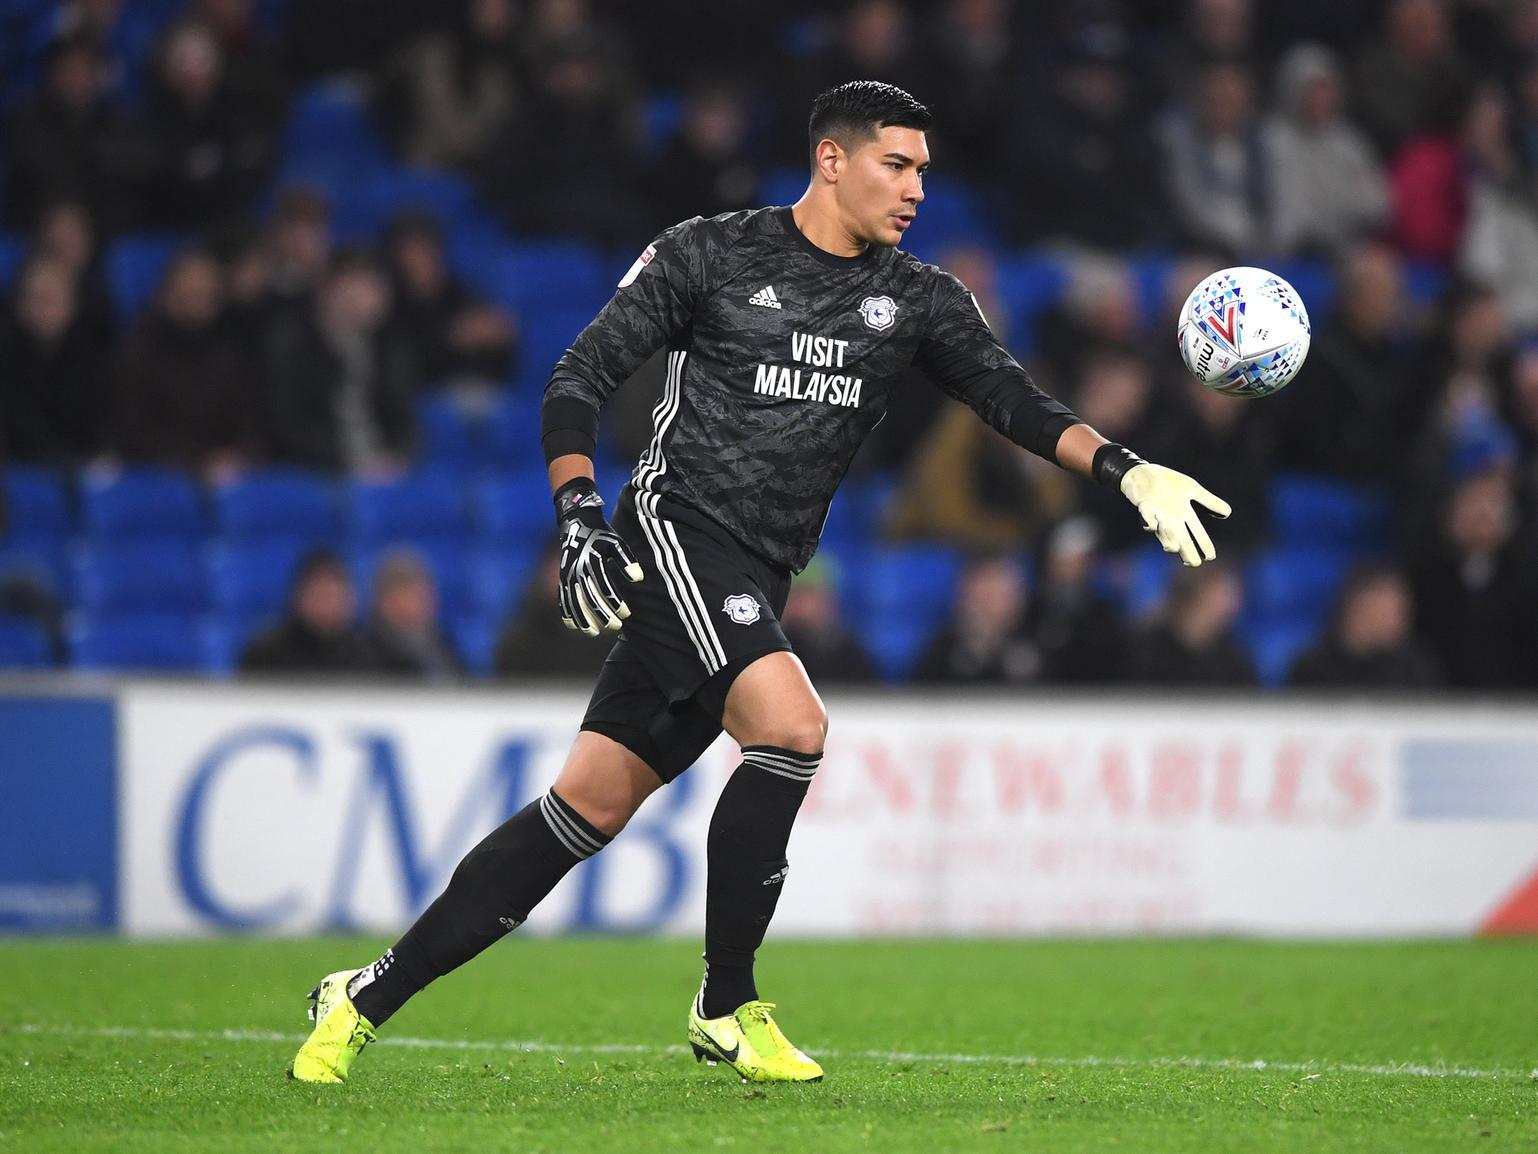 Cardiff City goalkeeper Neil Etheridge has been tipped to leave the club in the near future, after he was left on the bench for the club's 0-0 draw with Swansea City on Sunday. (BBC Football)